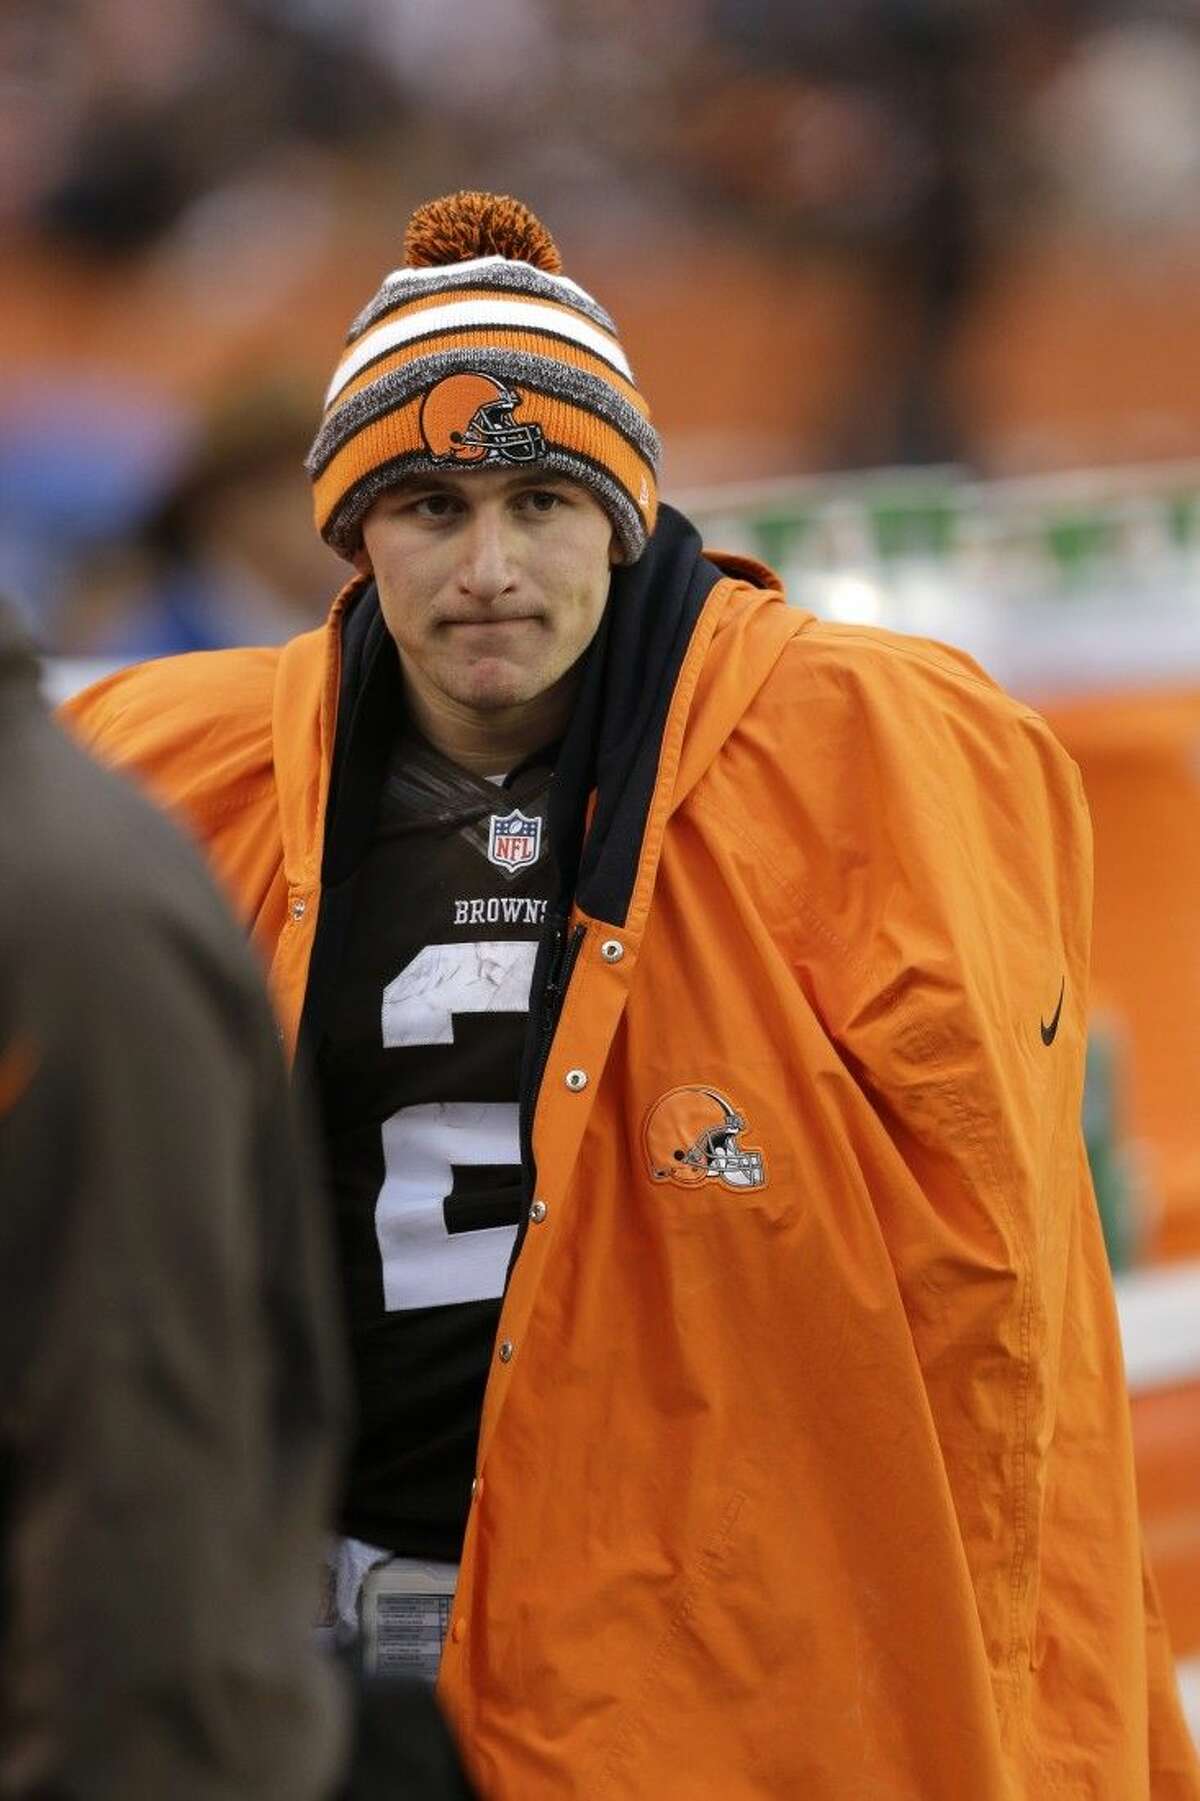 FILE - In this Dec. 14, 2014 file photo, Cleveland Browns quarterback Johnny Manziel watches from the sidelines in the fourth quarter of an NFL football game against the Cincinnati Bengals in Cleveland. A person familiar with the situation says Manziel has been released from a rehab facility. Manziel entered the undisclosed clinic Jan. 28 for treatment of an unspecified problem. The person said he was discharged Saturday, April 11, 2015, speaking on condition of anonymity because of privacy issues. (AP Photo/Tony Dejak)